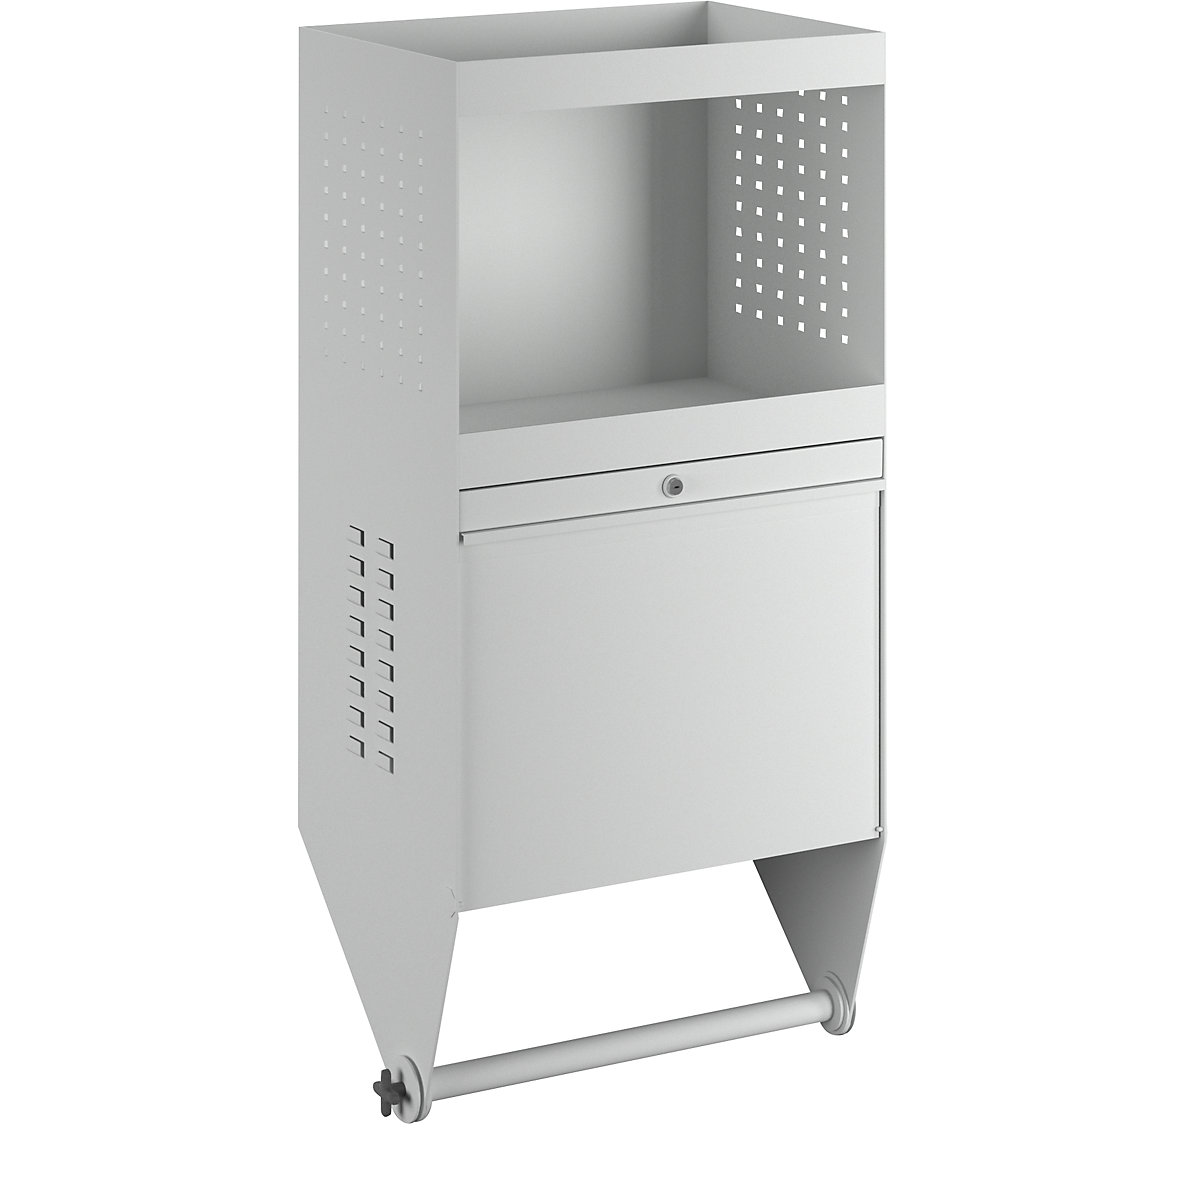 Wall mounted cupboard for tools, with folding work surface, max. reach 720 mm-10